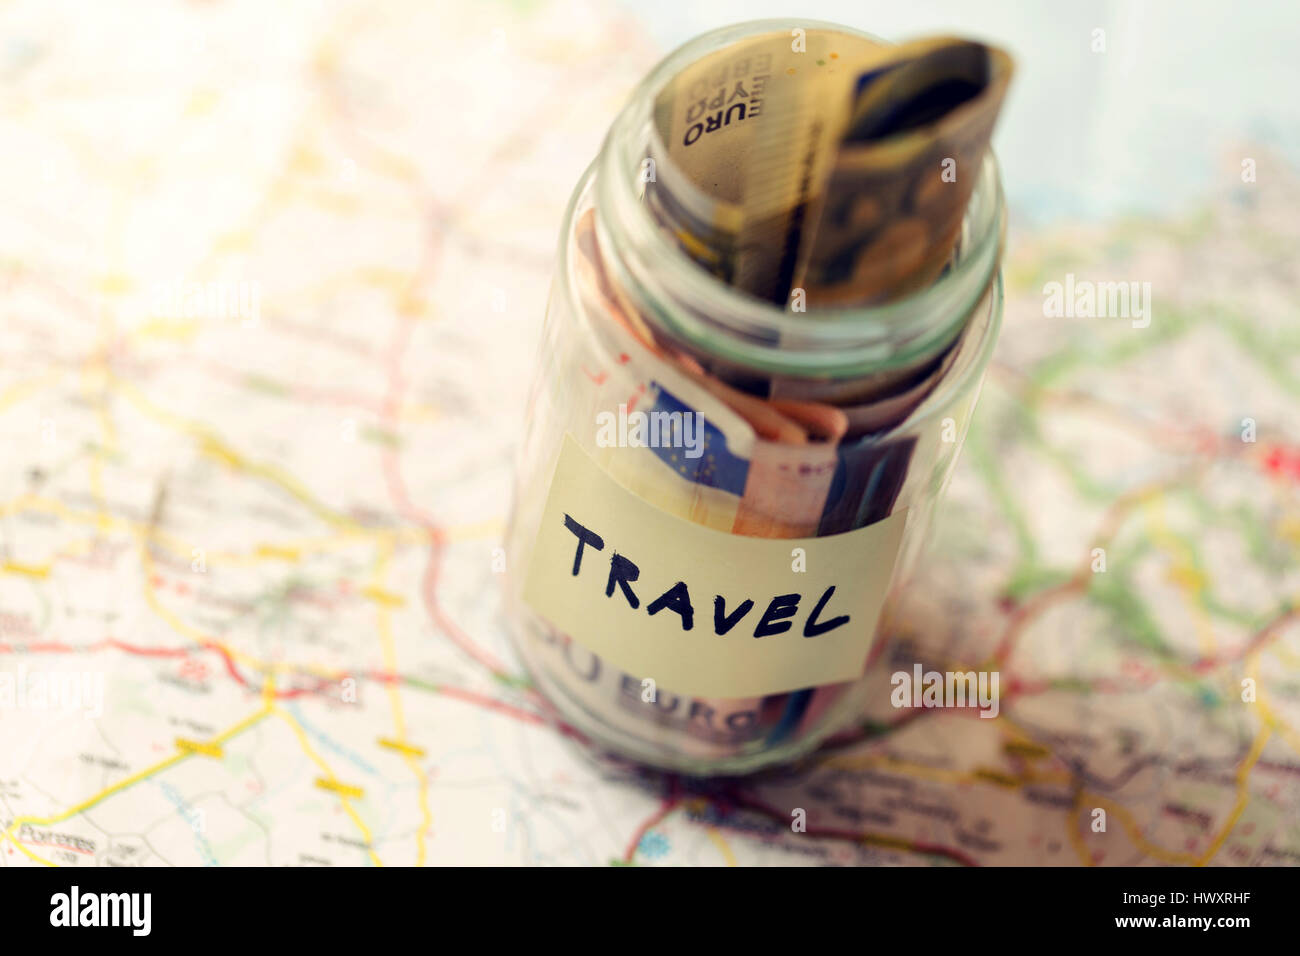 travel budget concept, money savings in a glass jar Stock Photo